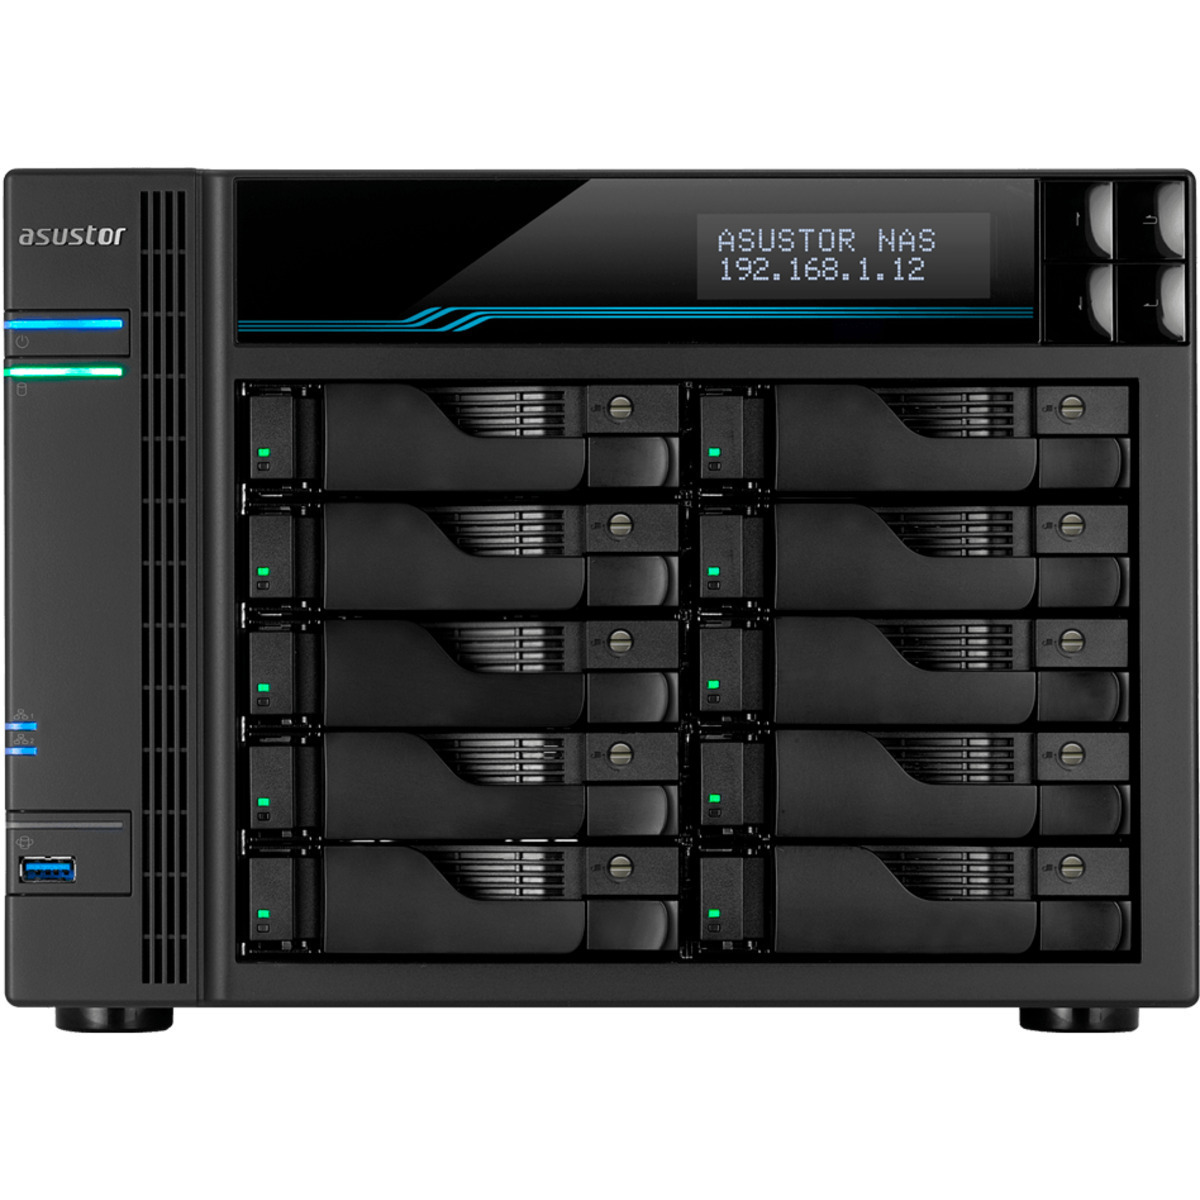 ASUSTOR AS6510T Lockerstor 10 180tb 10-Bay Desktop Multimedia / Power User / Business NAS - Network Attached Storage Device 10x18tb Seagate IronWolf Pro ST18000NT001 3.5 7200rpm SATA 6Gb/s HDD NAS Class Drives Installed - Burn-In Tested - FREE RAM UPGRADE AS6510T Lockerstor 10